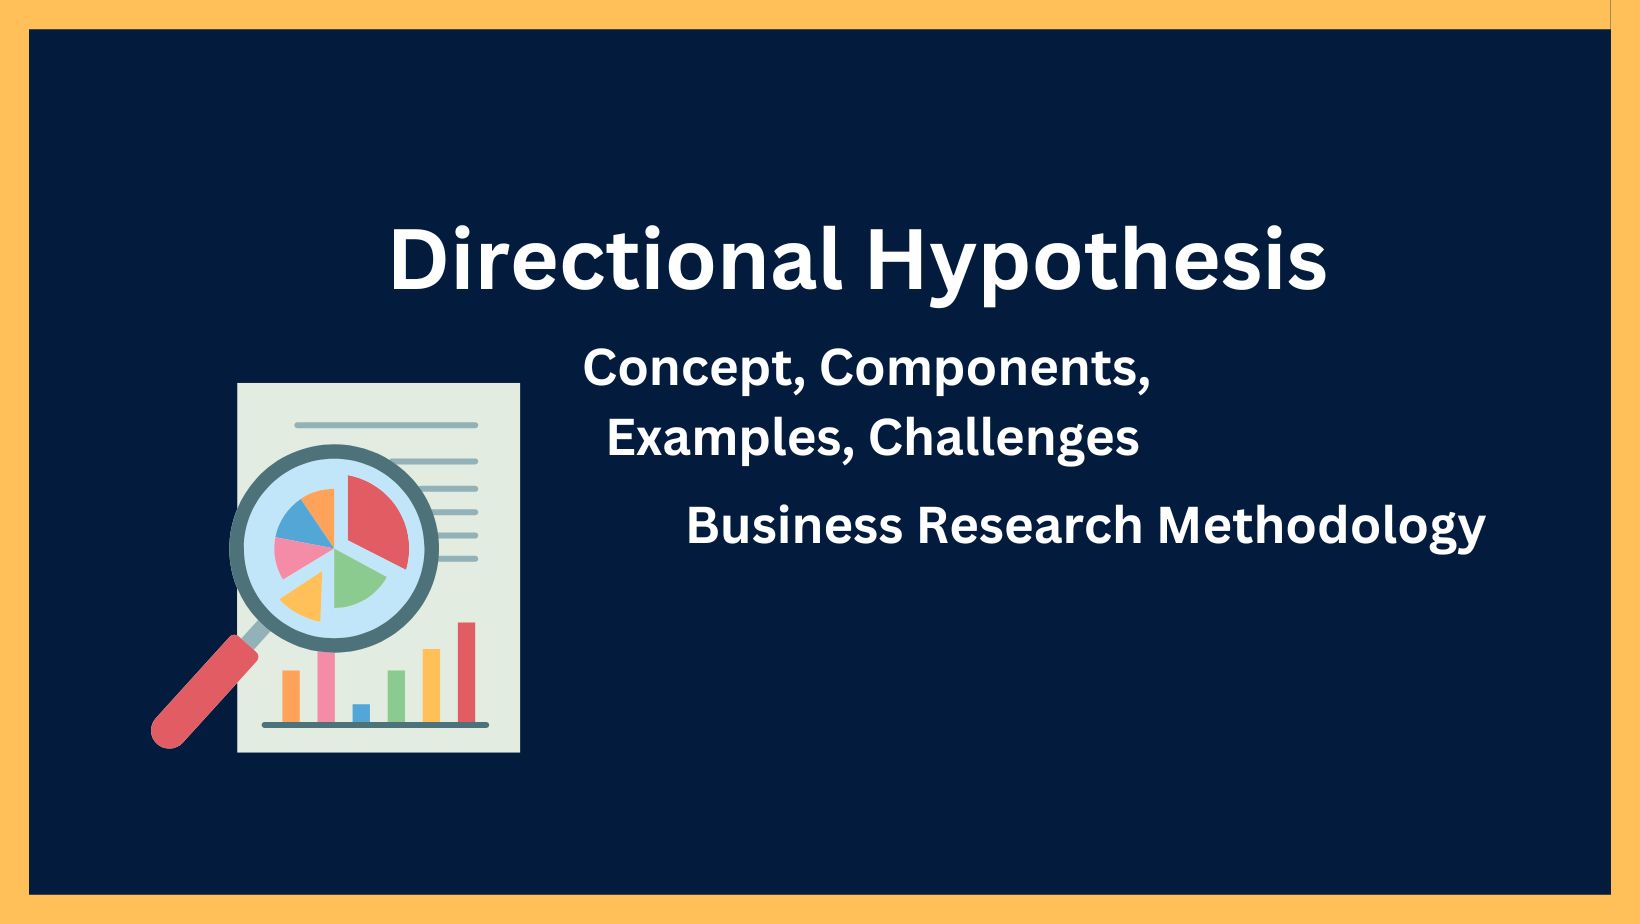 directional hypothesis definition in science